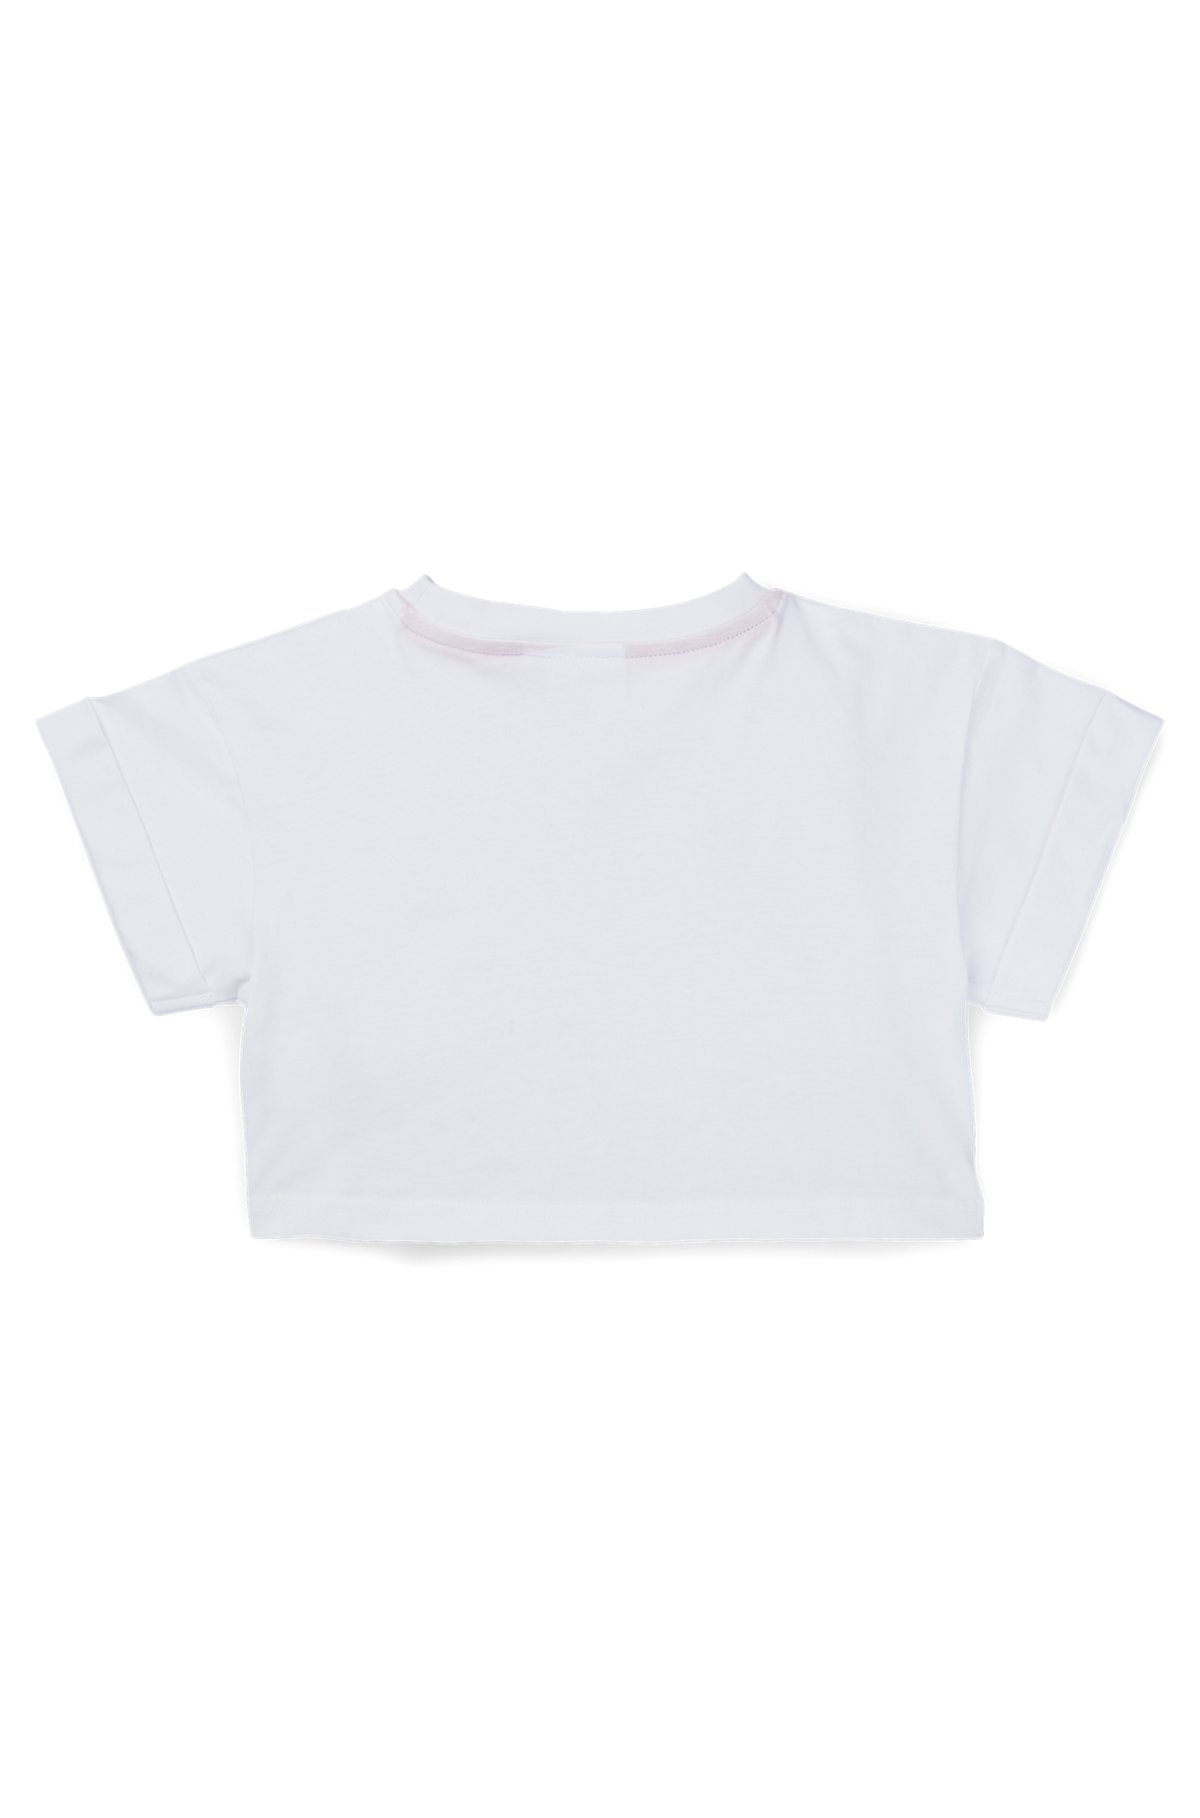 Kids' T-shirt in with logo print, White